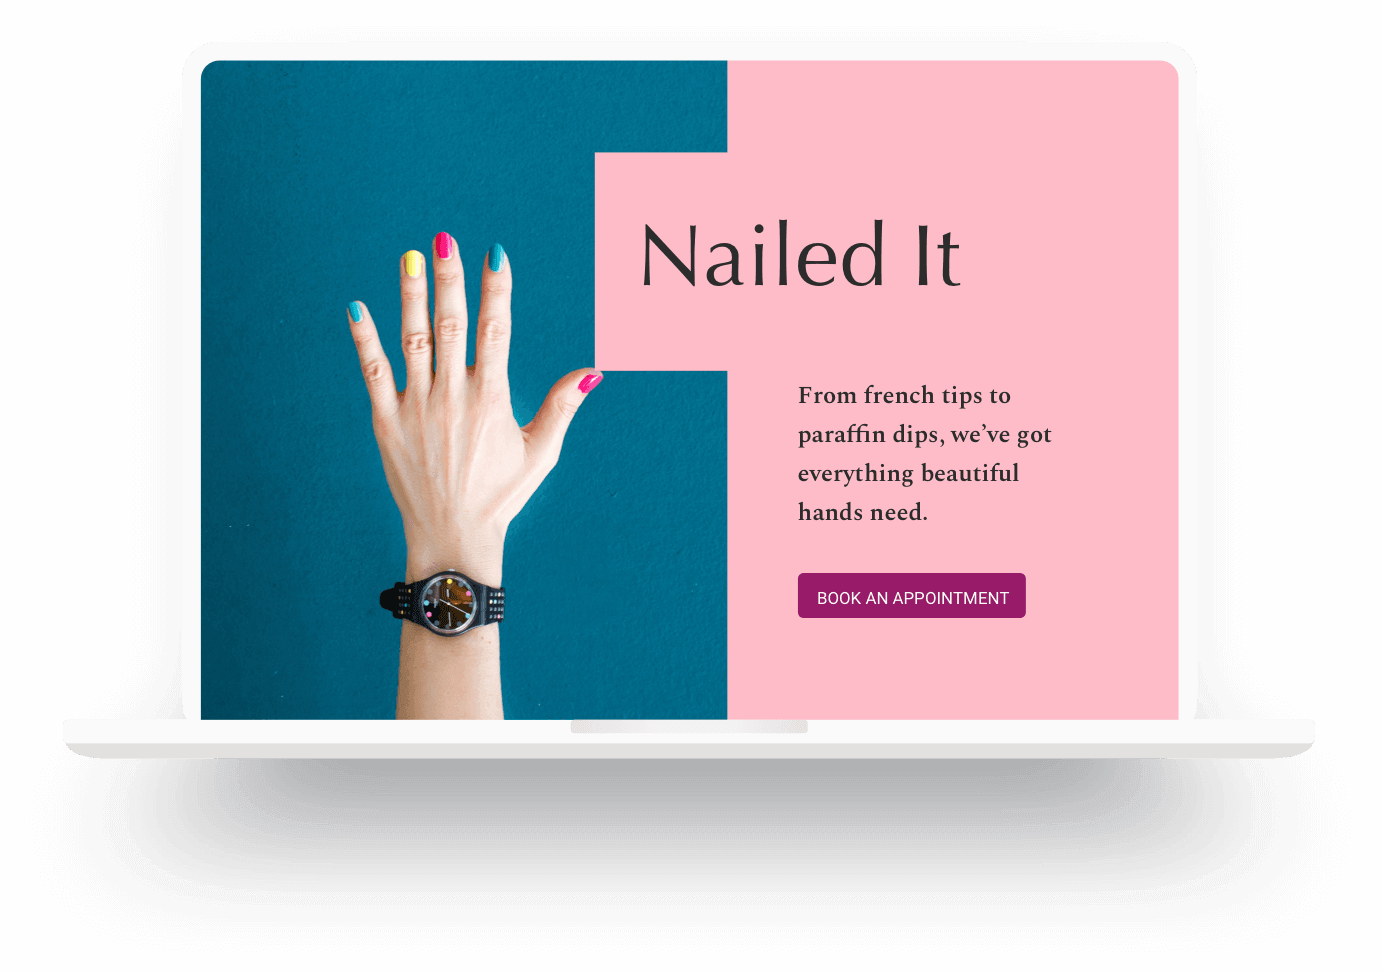 Example of a nail salon website built with Jimdo